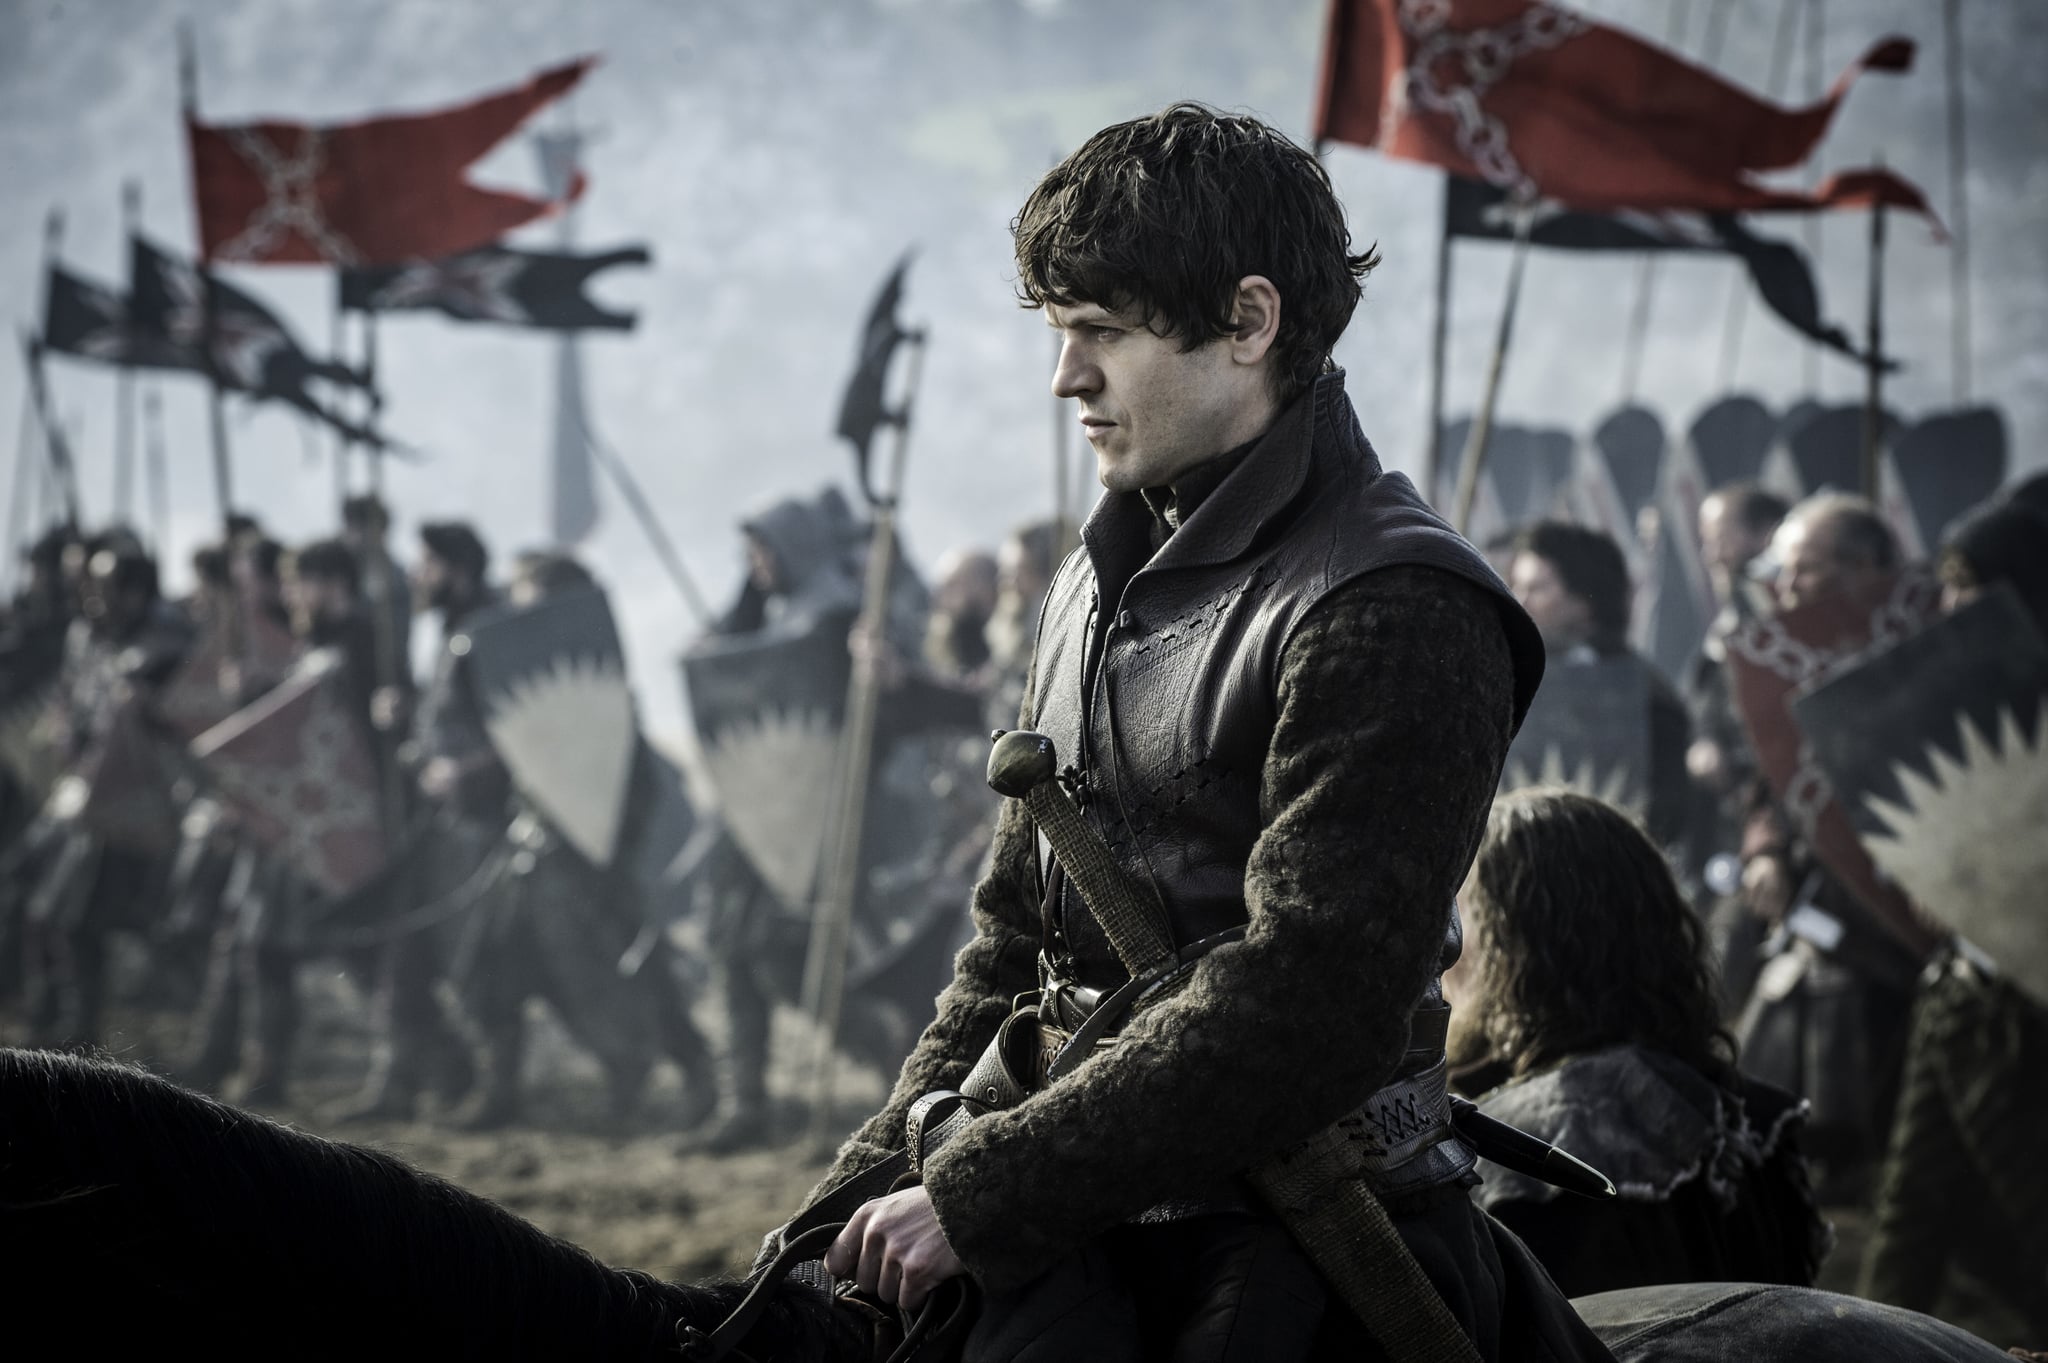 Dear Ramsay Bolton. Hows it going?